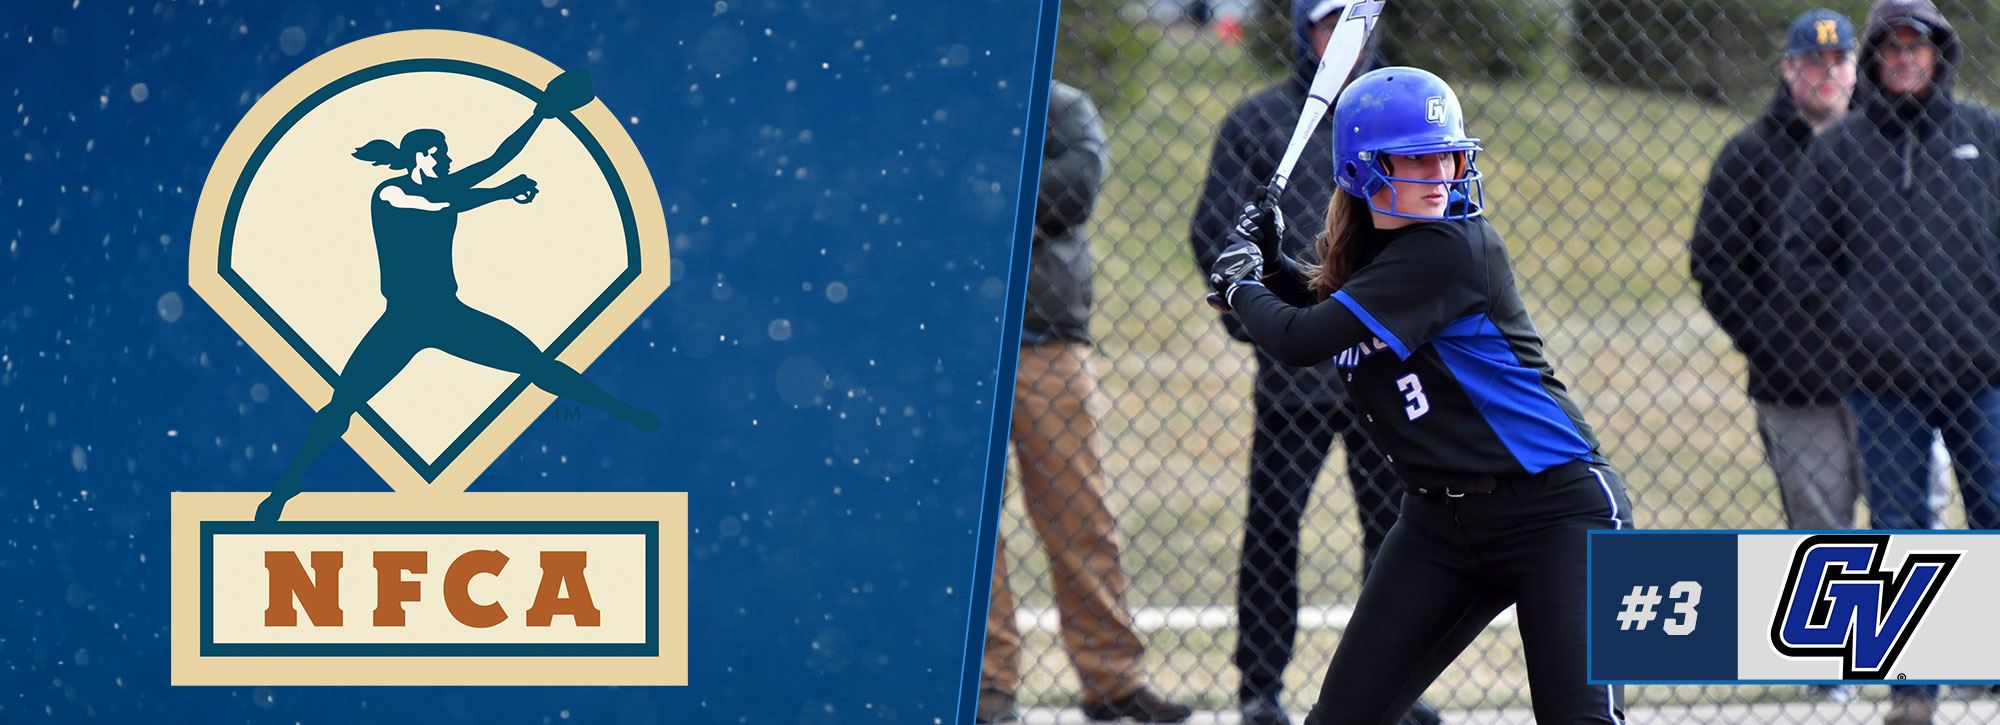 Lakers ranked 3rd in NFCA Coaches' Poll